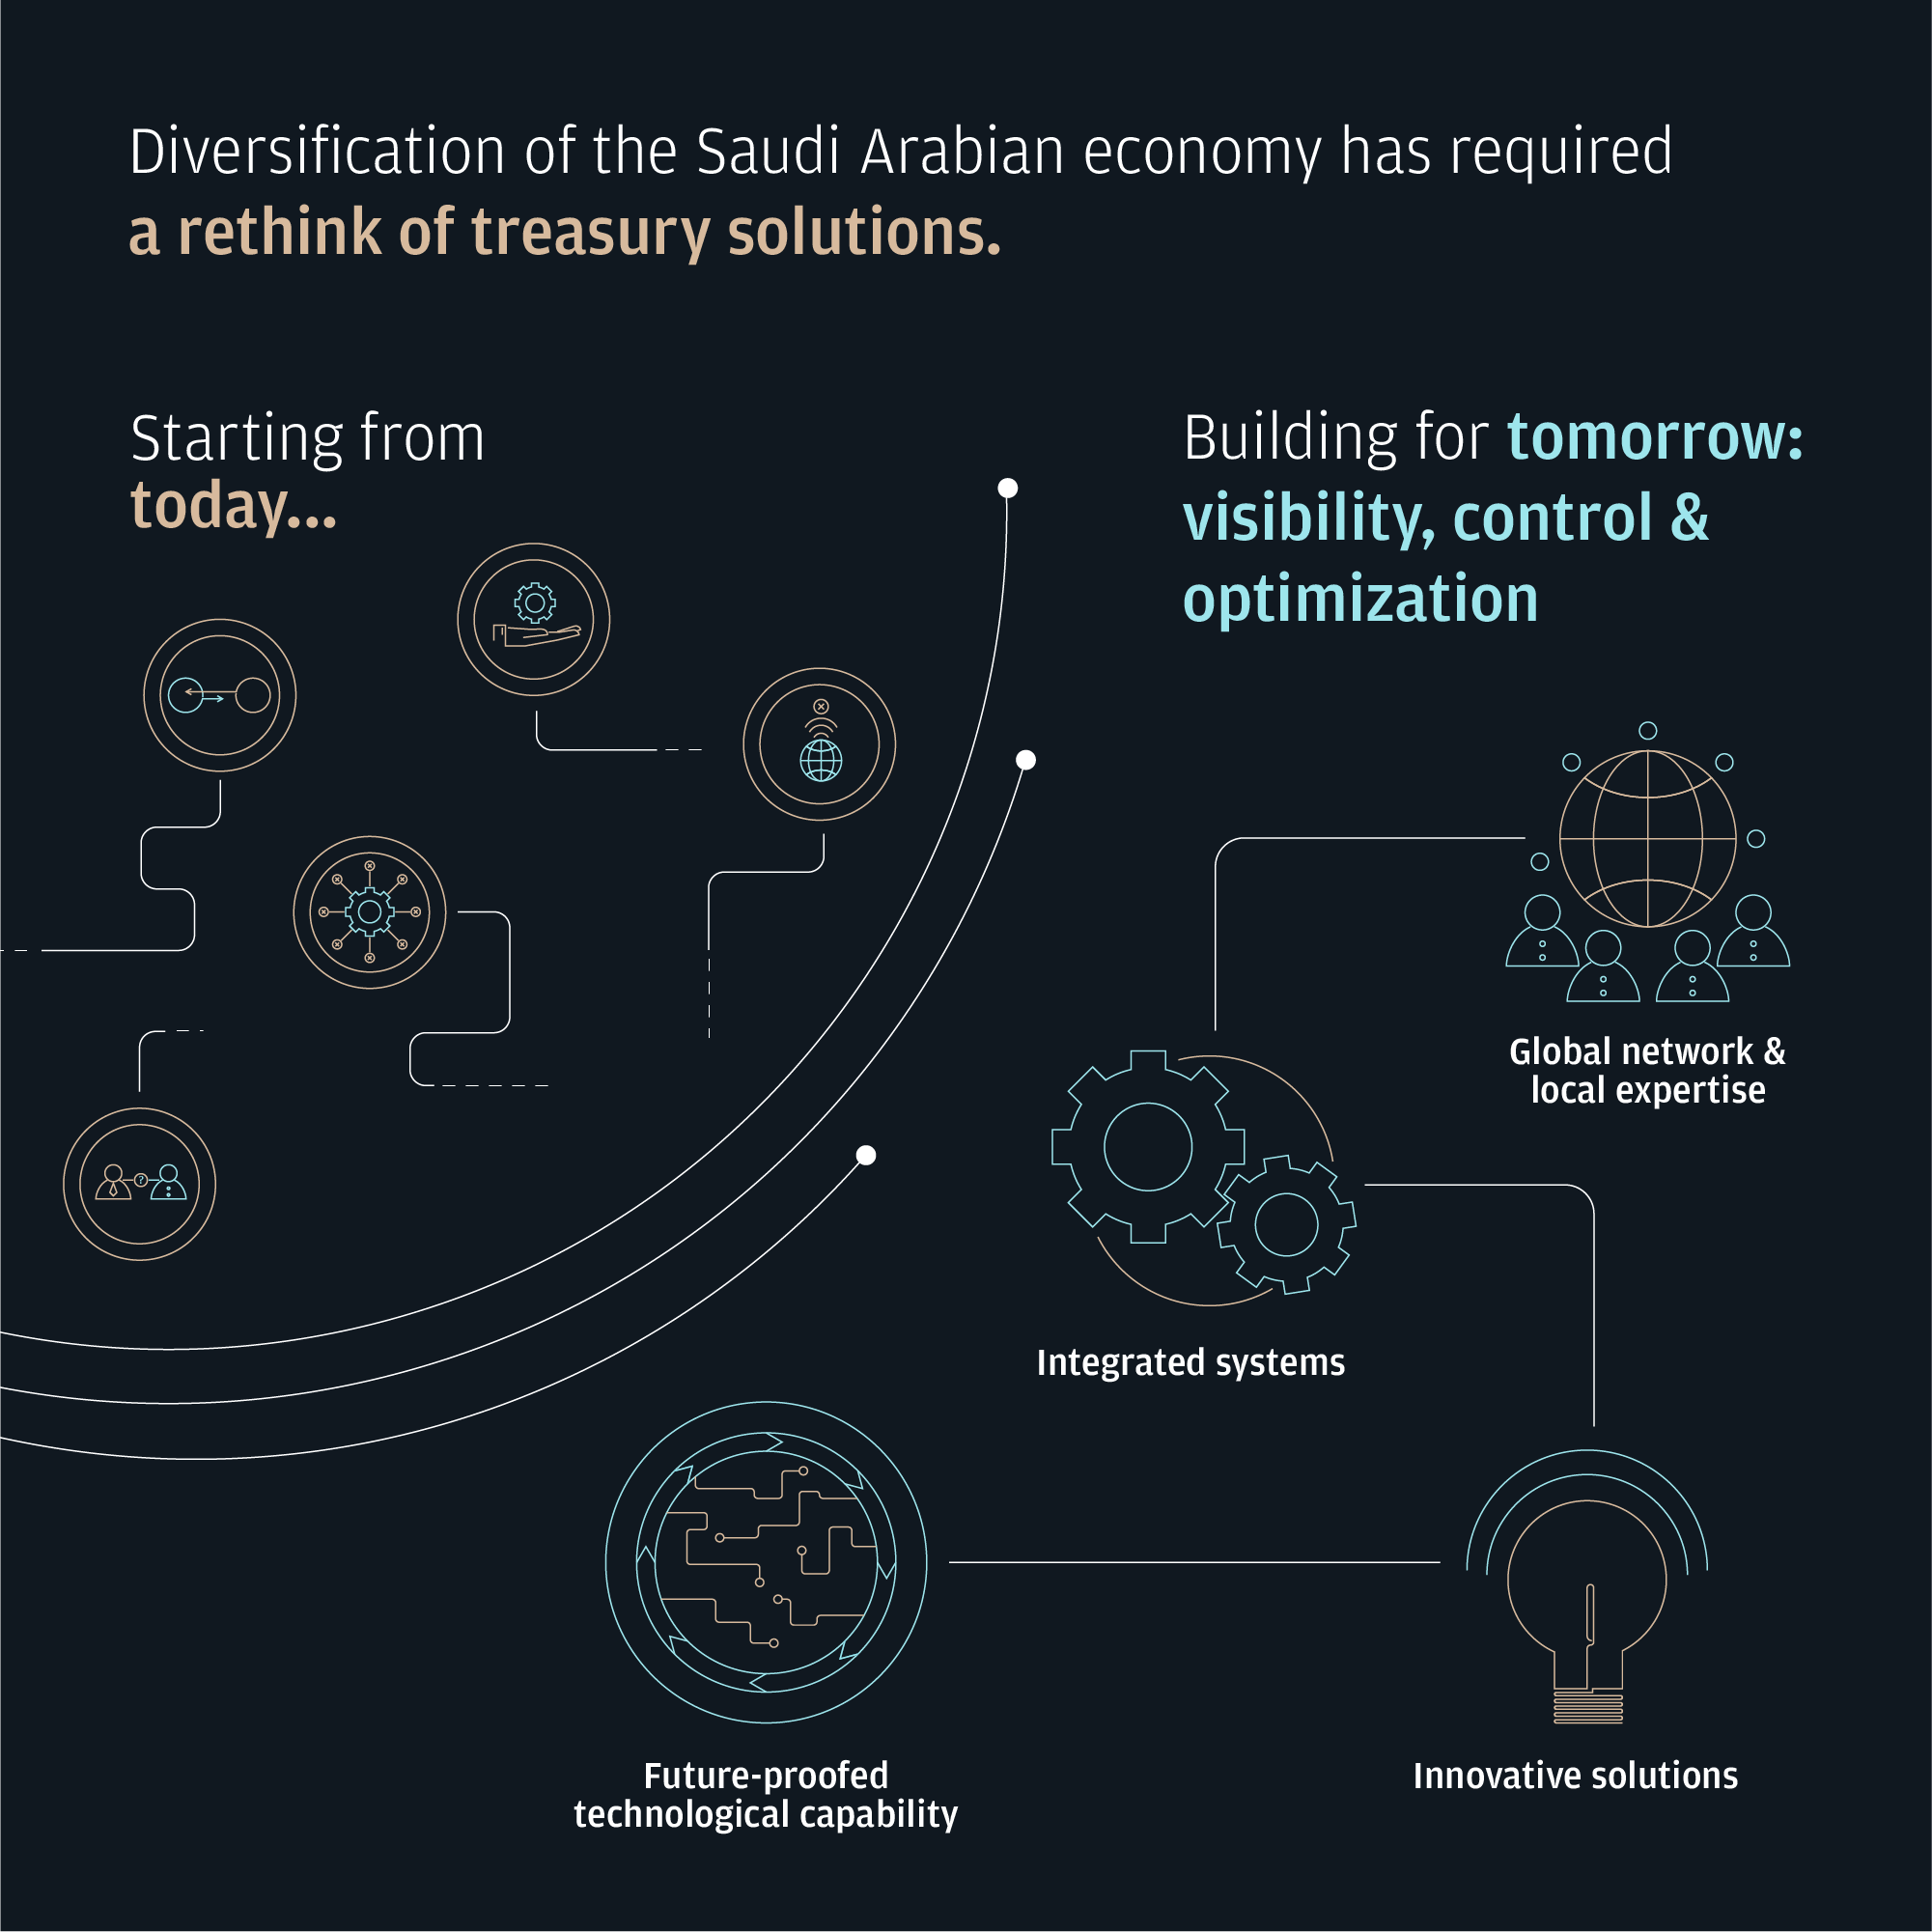 Diversification of the Saudi Arabian economy has required a rethink of treasury solutions.